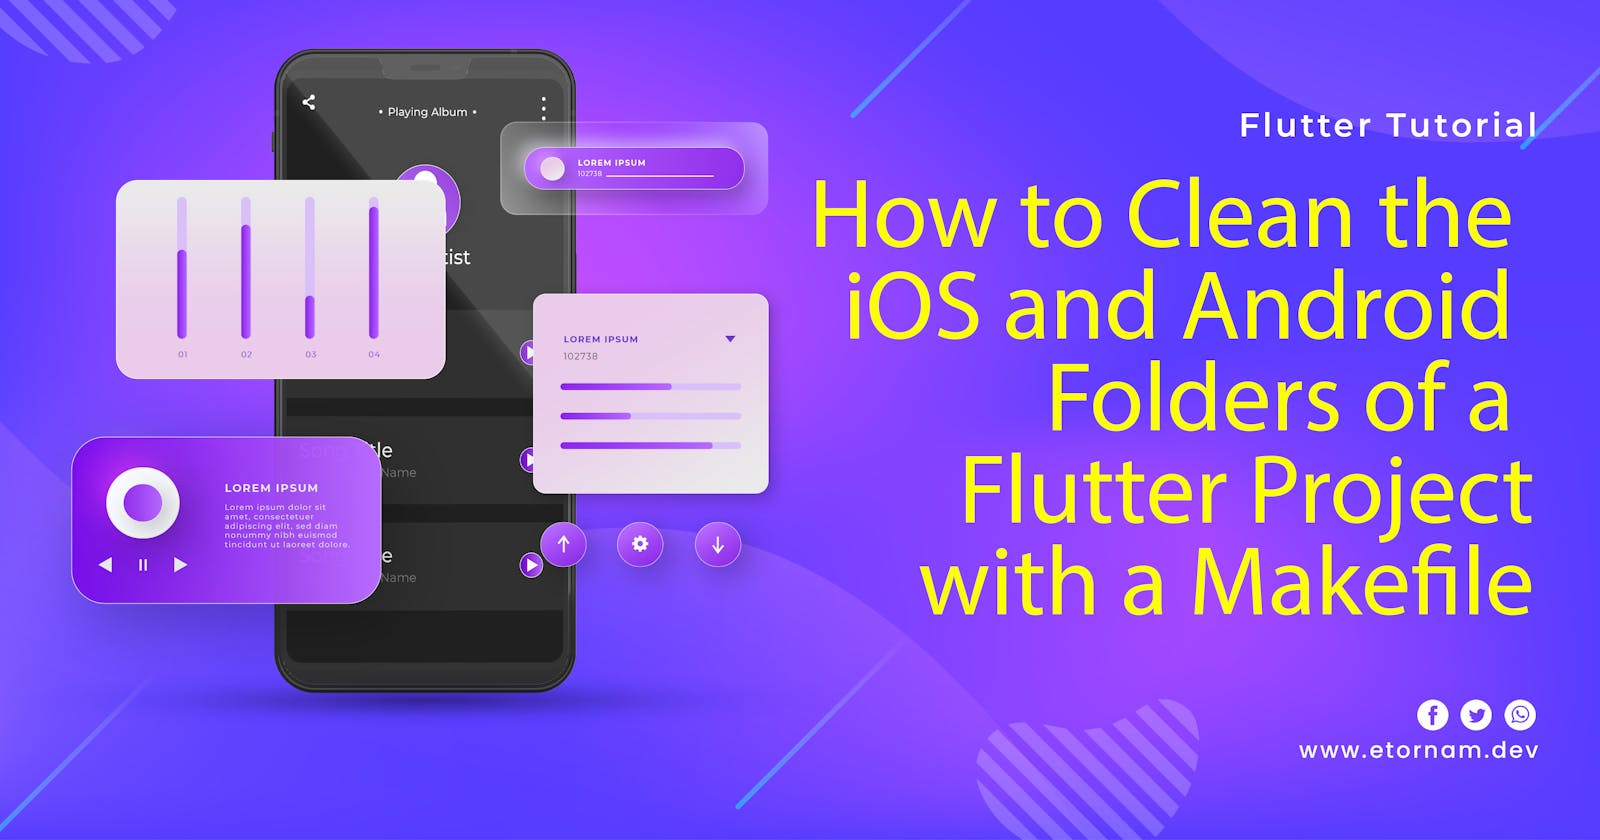 How to Clean the iOS and Android Folders of a Flutter Project with a Makefile